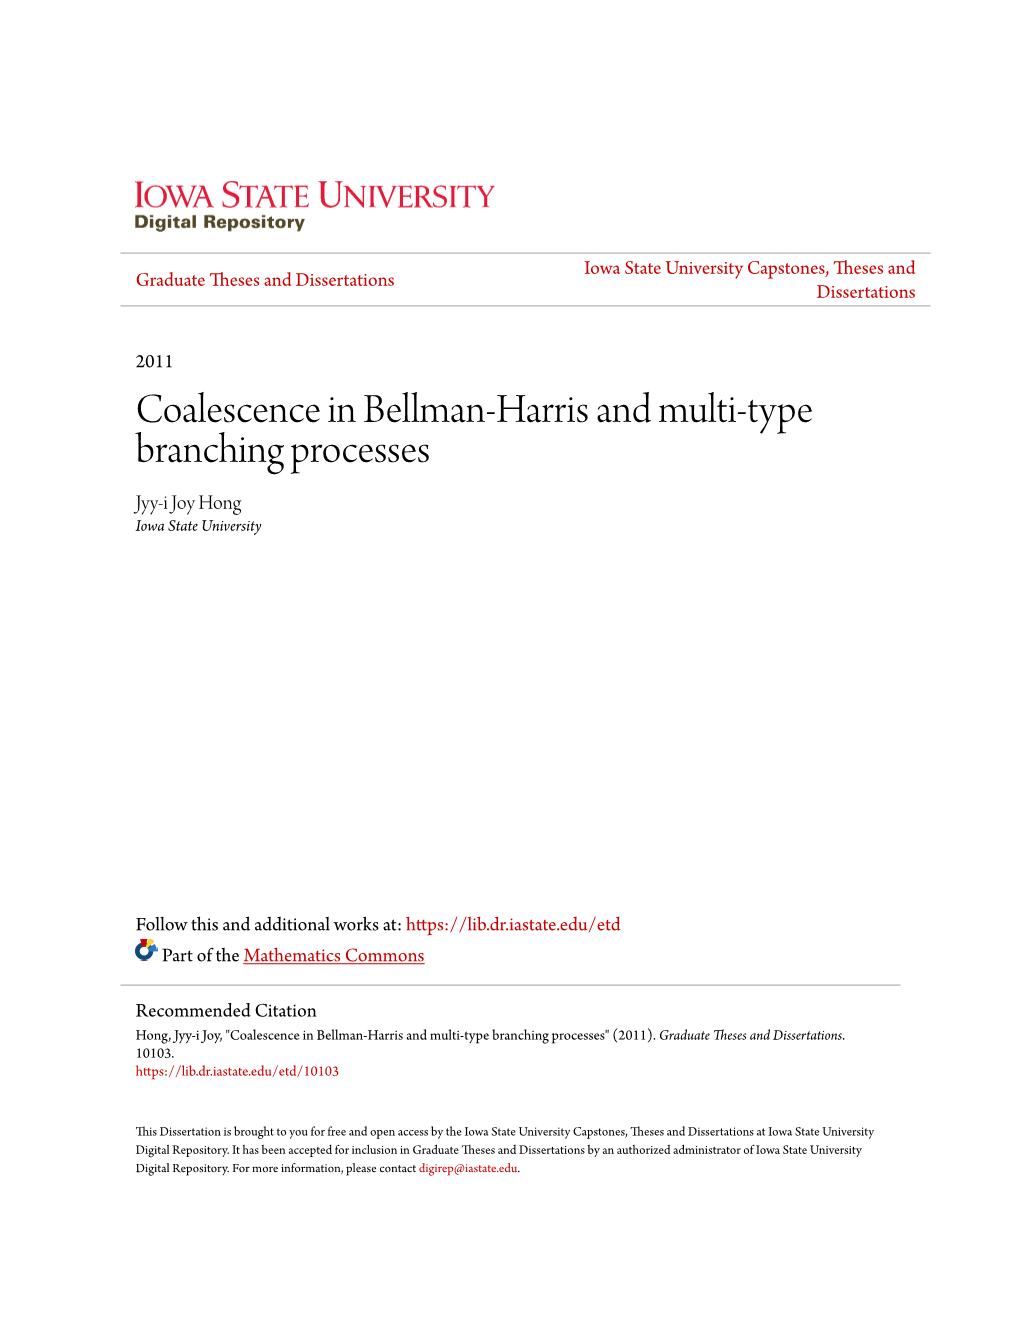 Coalescence in Bellman-Harris and Multi-Type Branching Processes Jyy-I Joy Hong Iowa State University